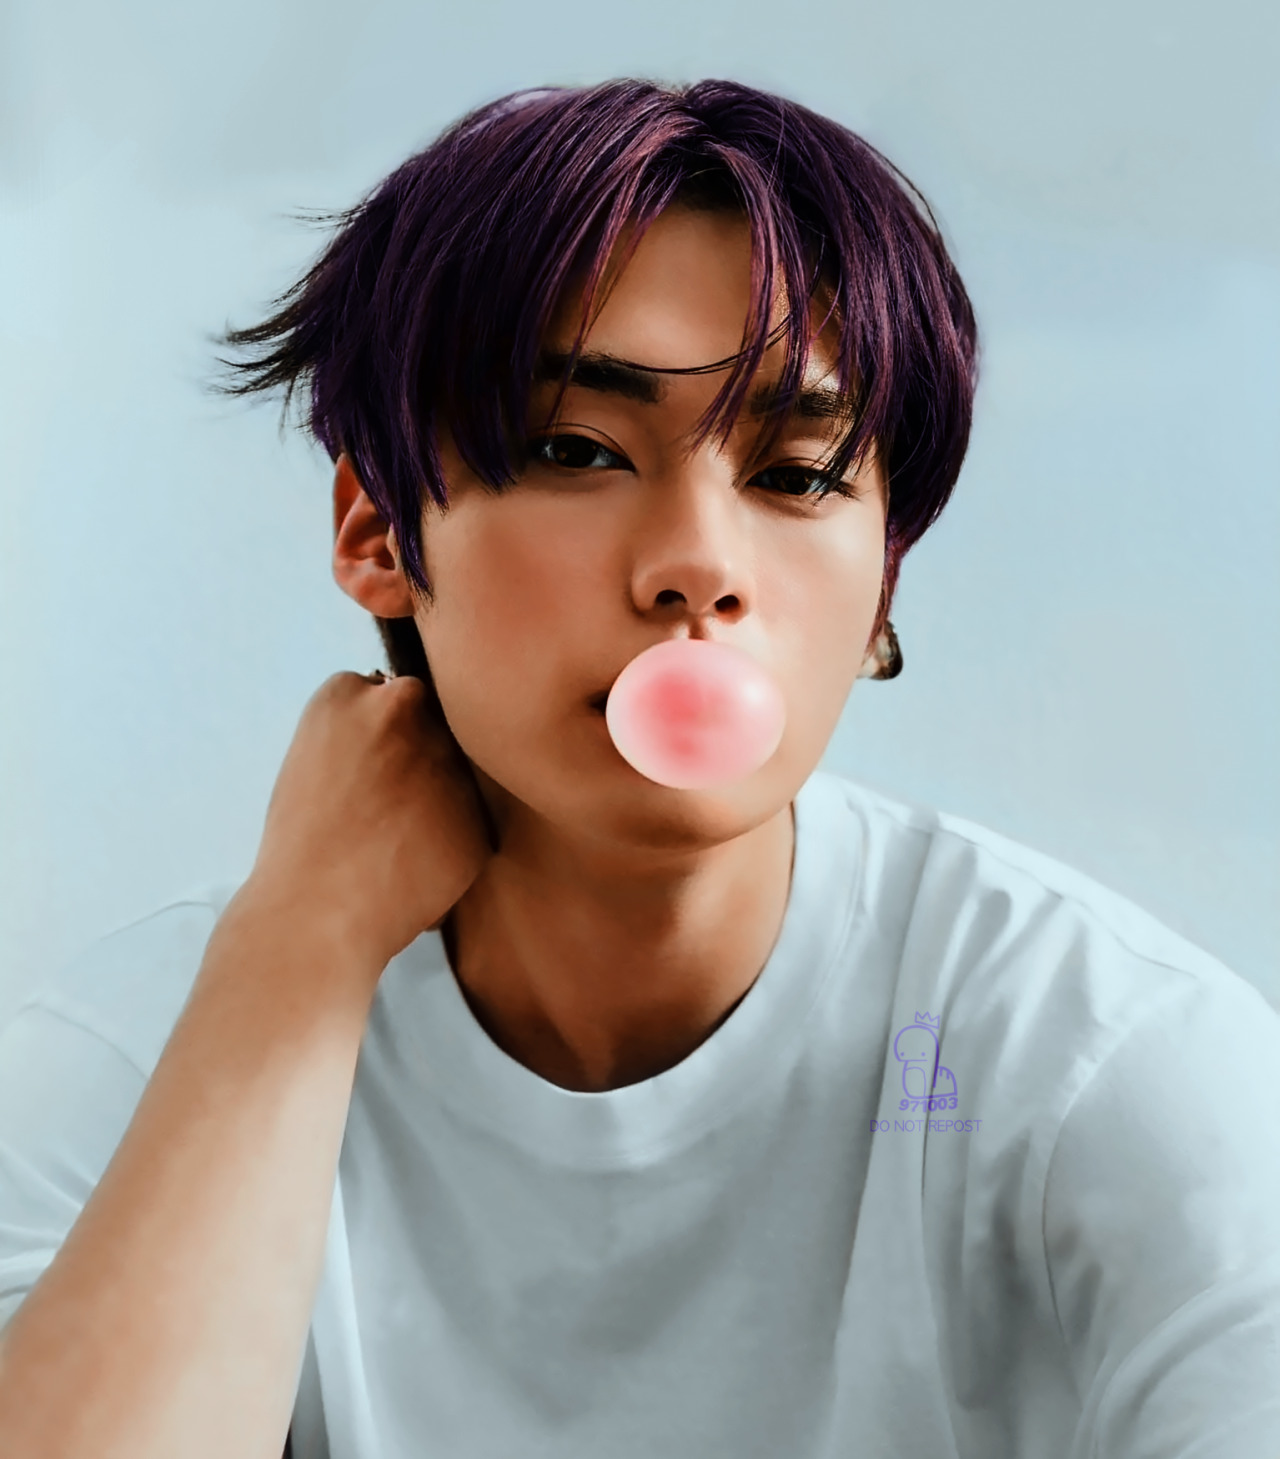 Lee Know ✧ Beauty+ [recolored] #Lee Know#Lee Minho#Minho#Stray Kids#Createskz#bystay#staysource#jypartists#idolsincedits#mgroupsedit#ultkpopnetwork #drm.pst #vilmatrack#cheytermelon#hirueblue #drm.edit  #as always dont look toooo close cause i did this with a track pad i was too lazy to pull out my tablet szxgf